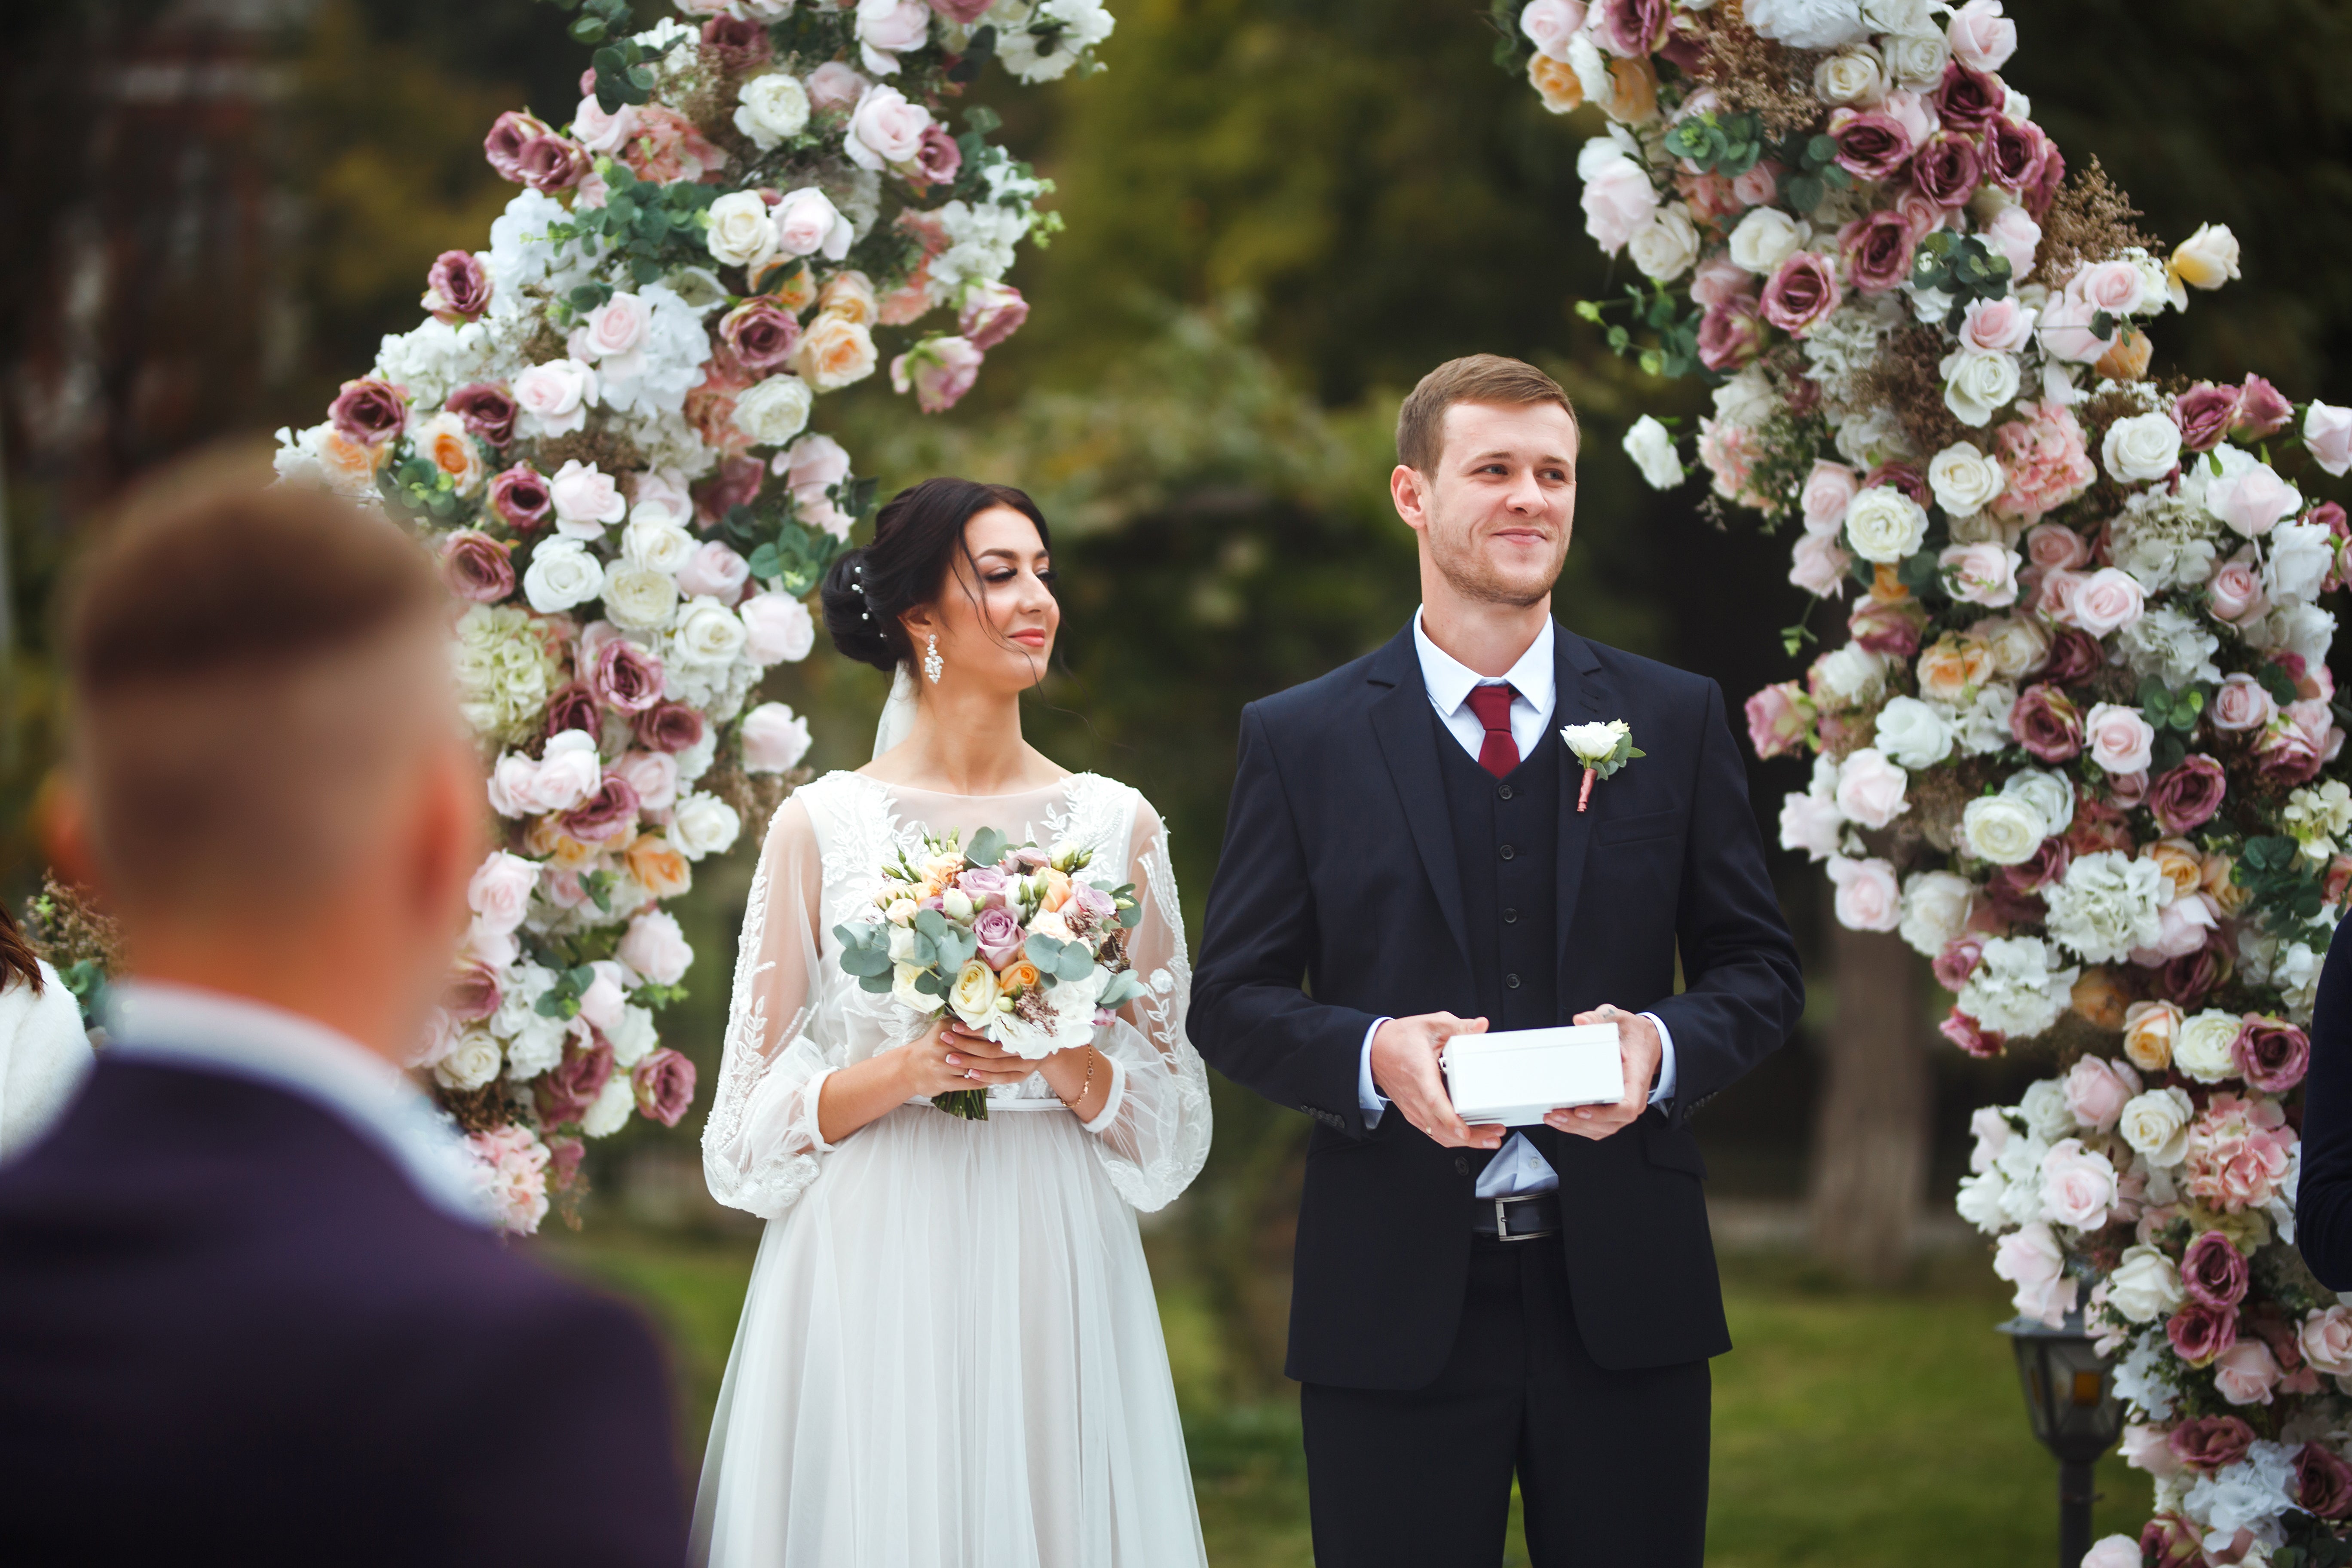 The Role of Flowers in Wedding Ceremonies